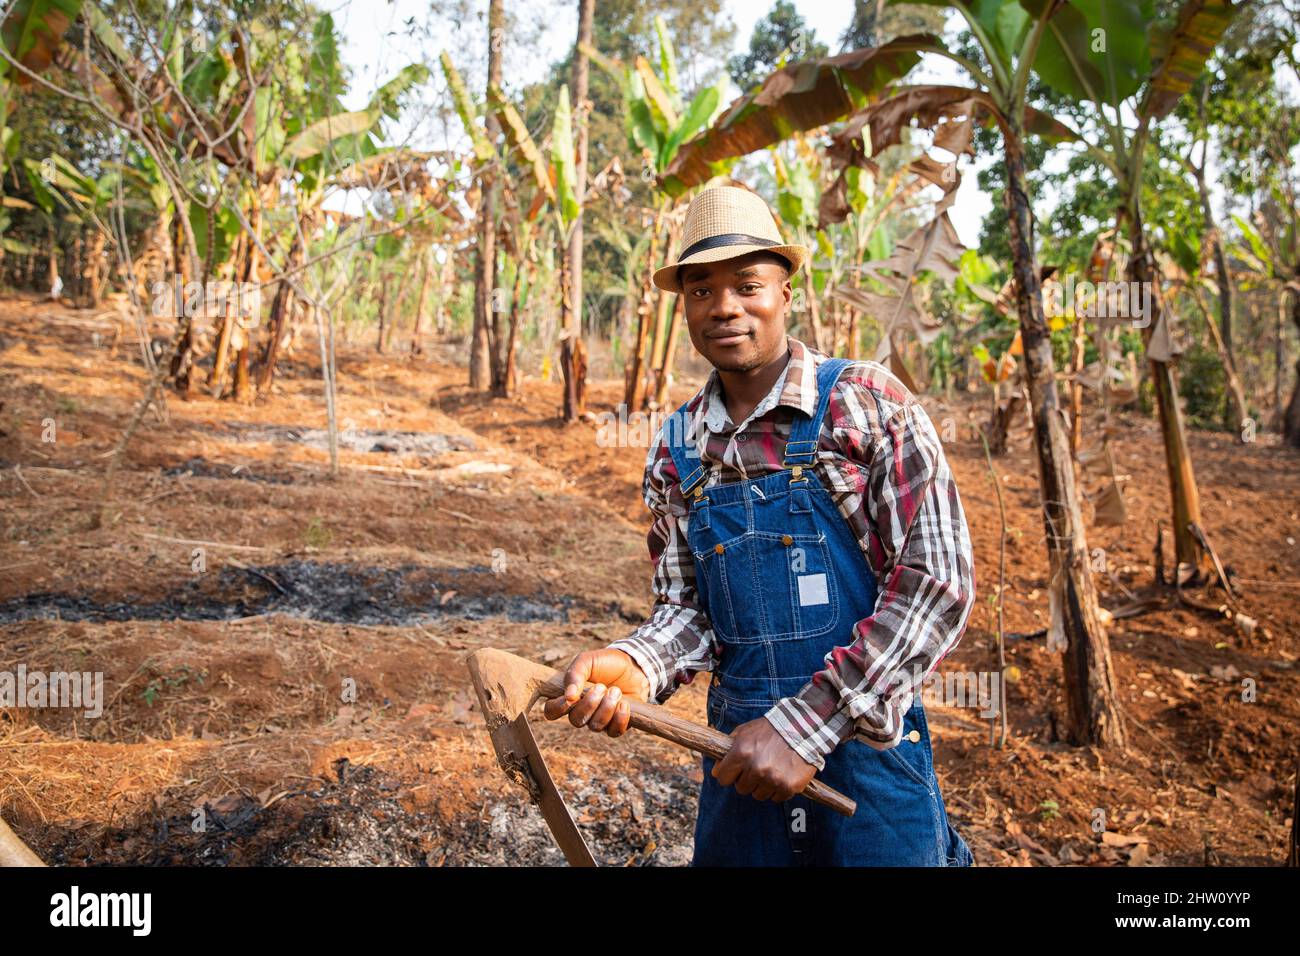 African farmer works the field with the hoe, cultivator at work on his plantation Stock Photo